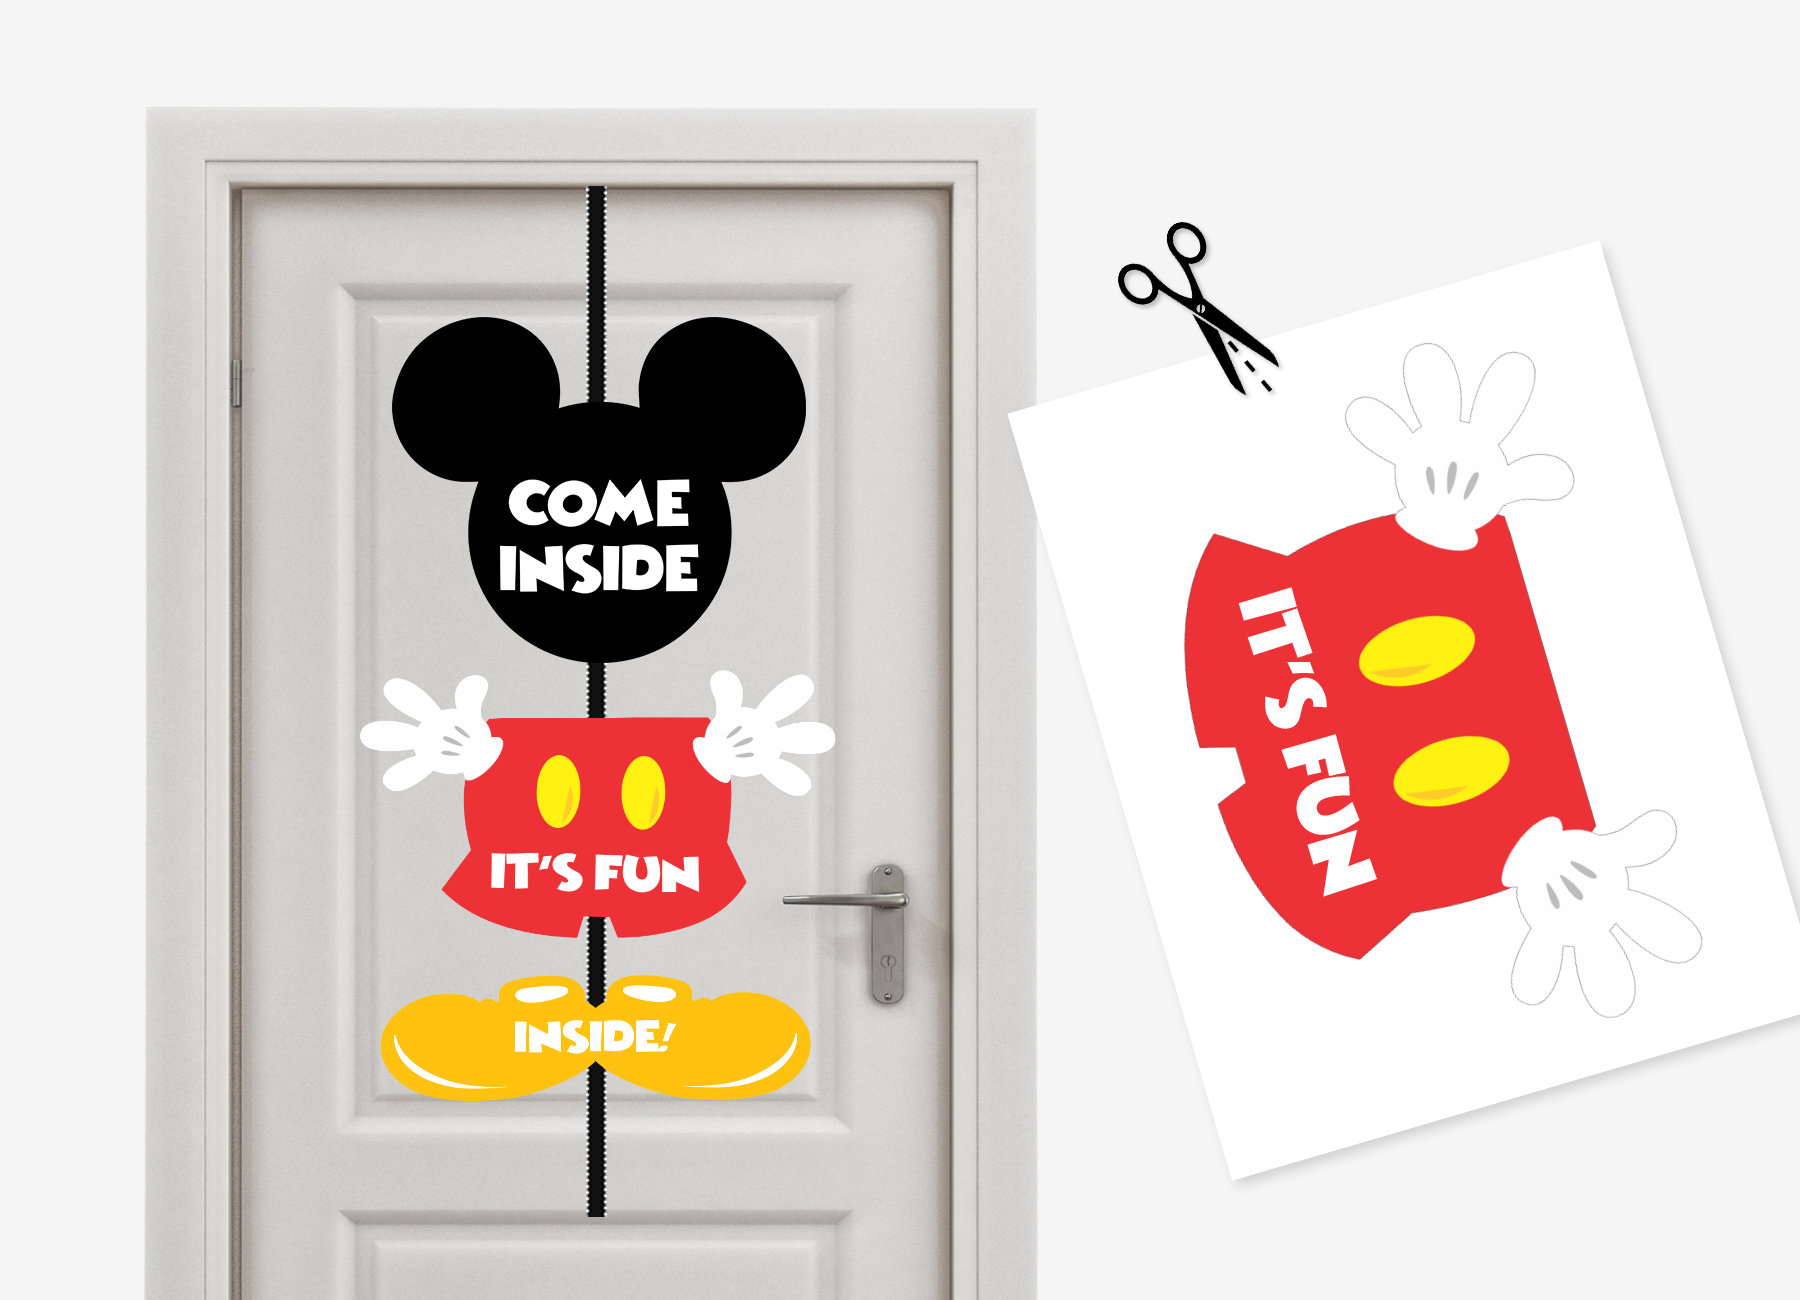 1 Pc Mickey Mouse Door Board For Mickey Mouse Birthday Party  Decorations/Mickey Mouse Theme Birthday Decoration - Party Propz: Online  Party Supply And Birthday Decoration Product Store